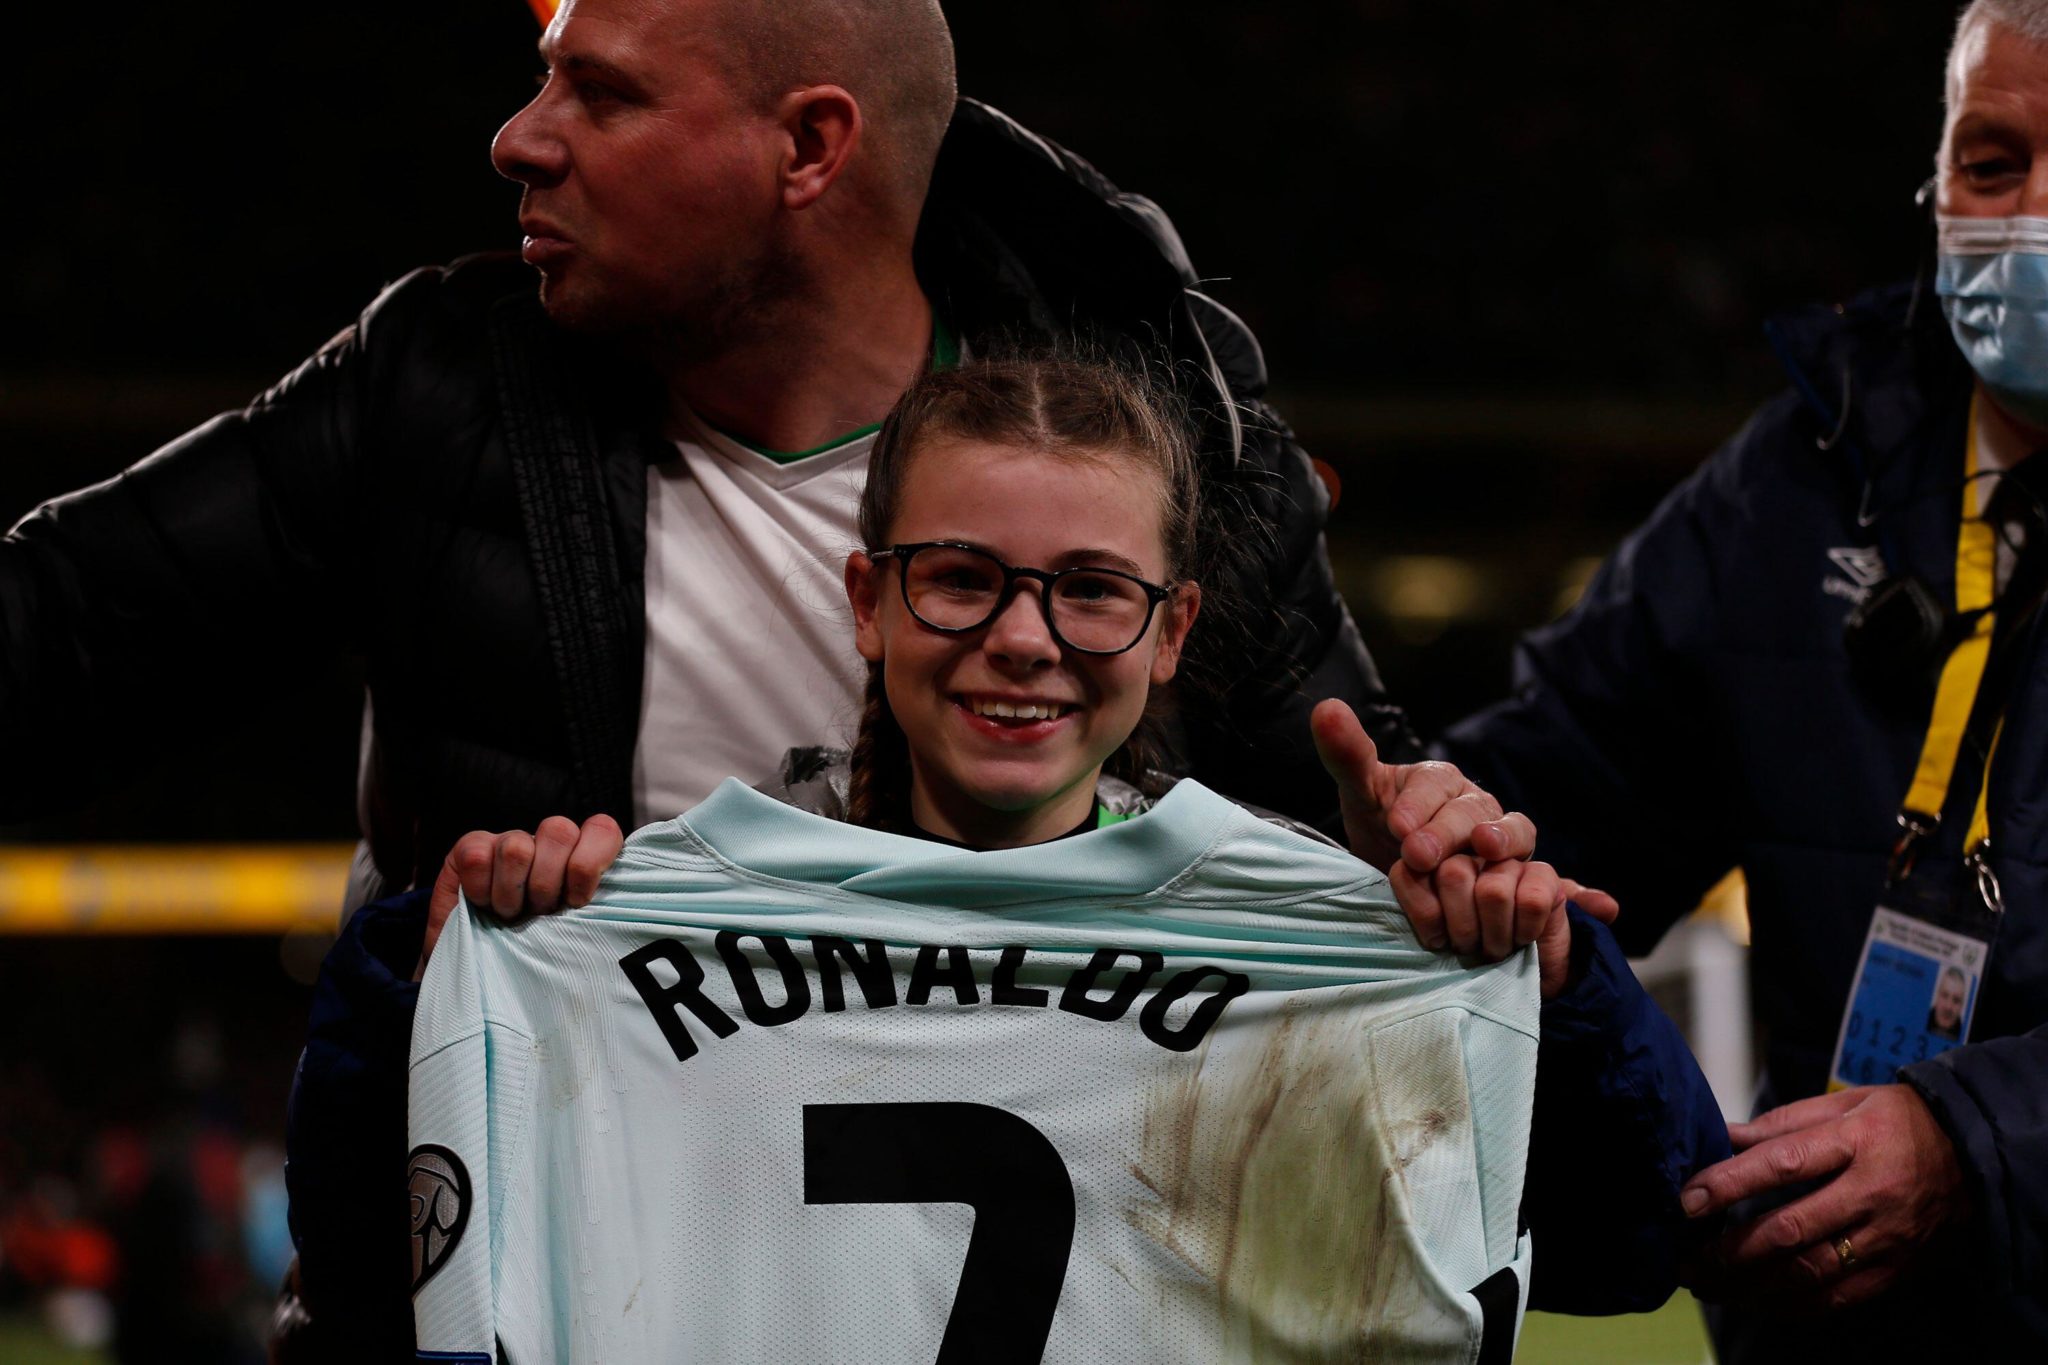 Addison Whelan with the jersey of Cristiano Ronaldo (c) of Portugal after the full time whistle